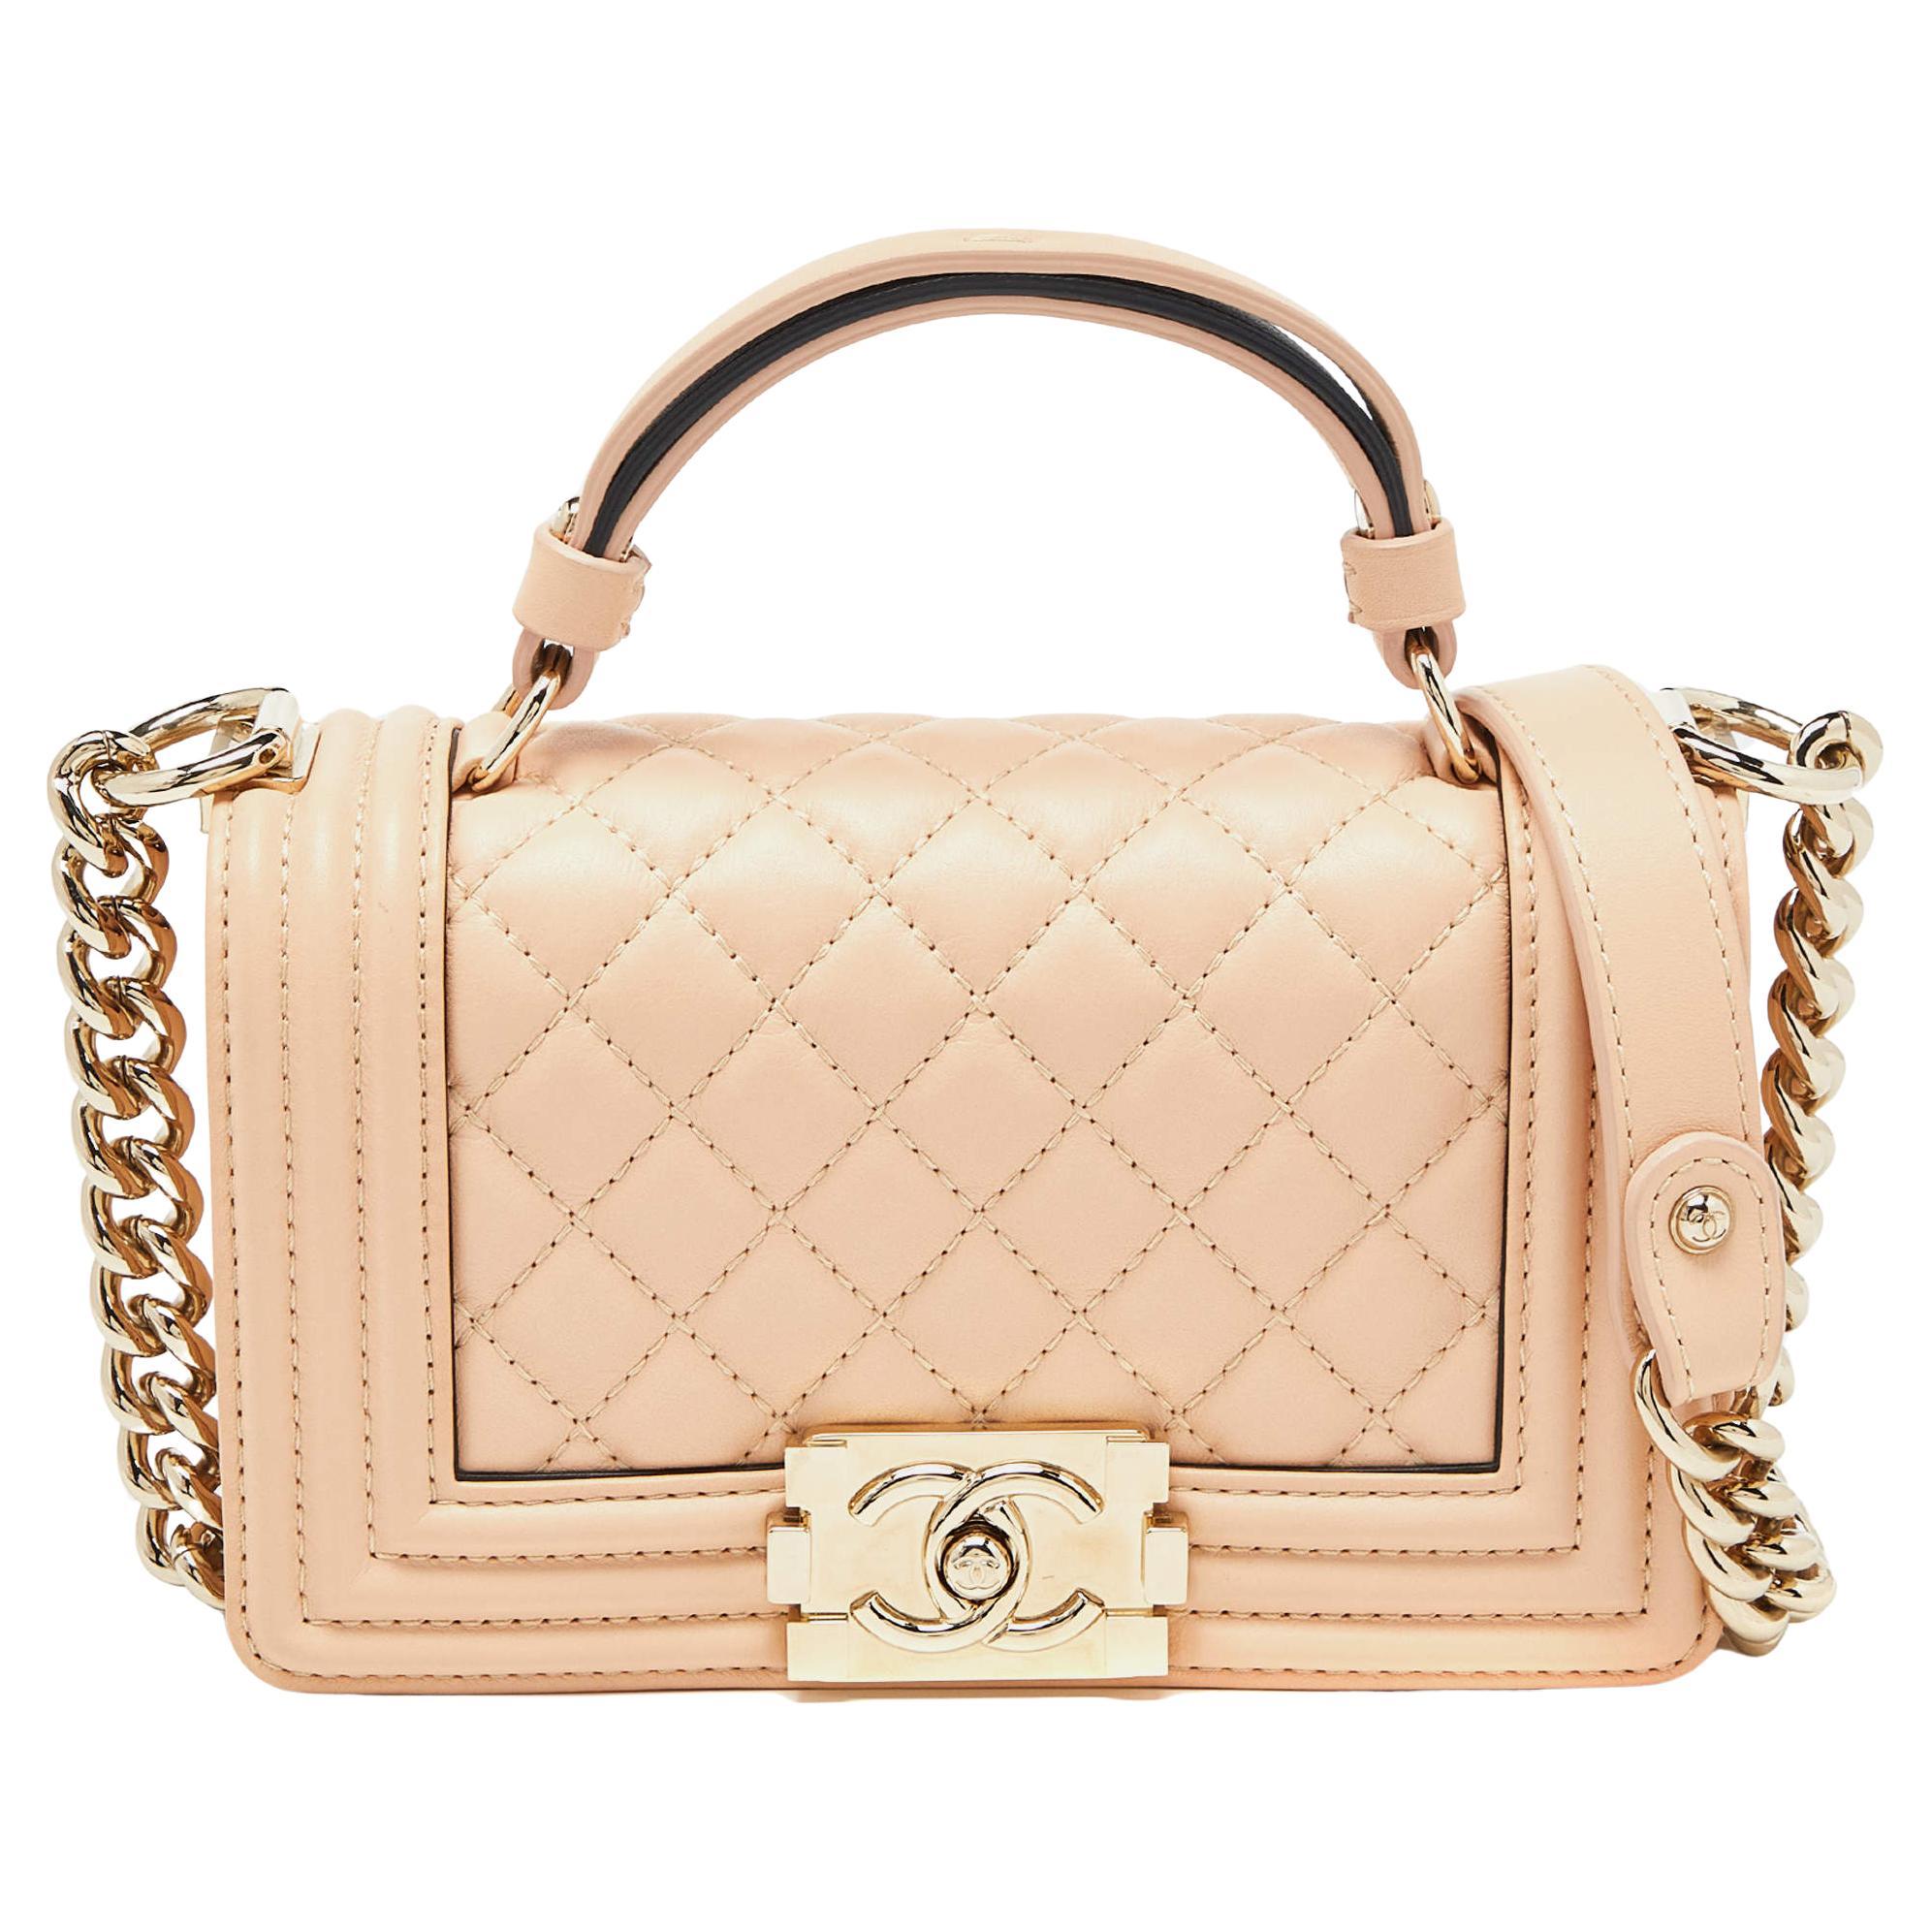 Chanel Beige Quilted Leather Small Boy Top Handle Bag For Sale